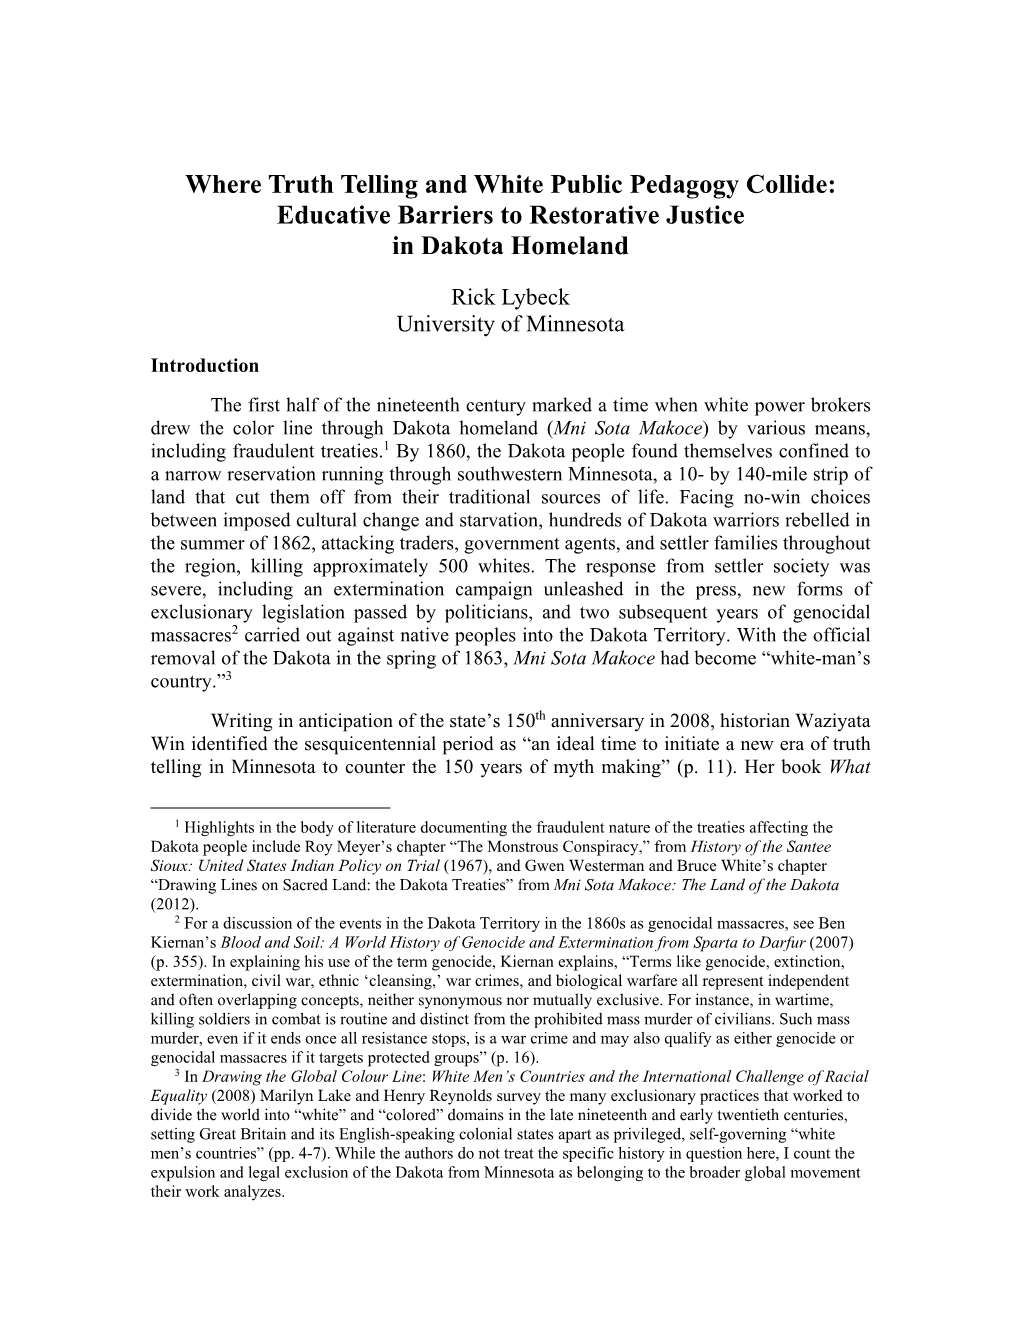 Where Truth Telling and White Public Pedagogy Collide: Educative Barriers to Restorative Justice in Dakota Homeland